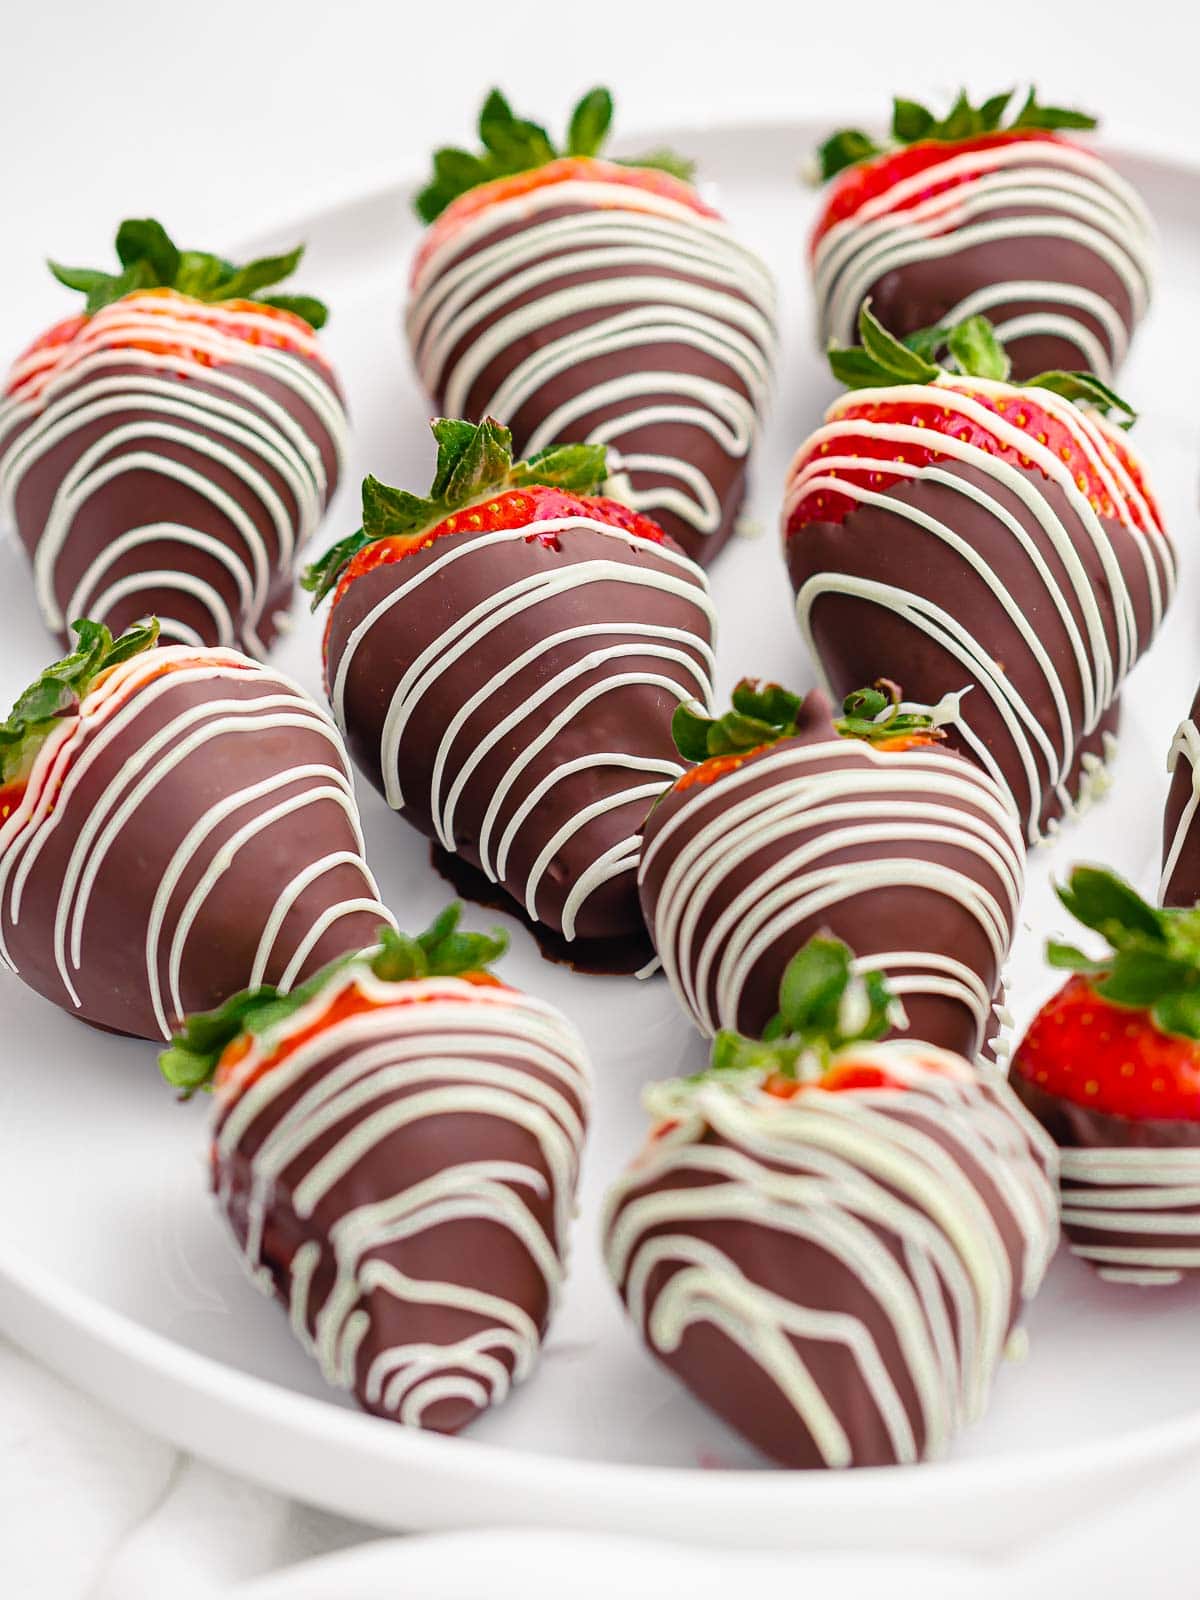 close up of chocolate covered strawberries with white chocolate drizzle on a white plate